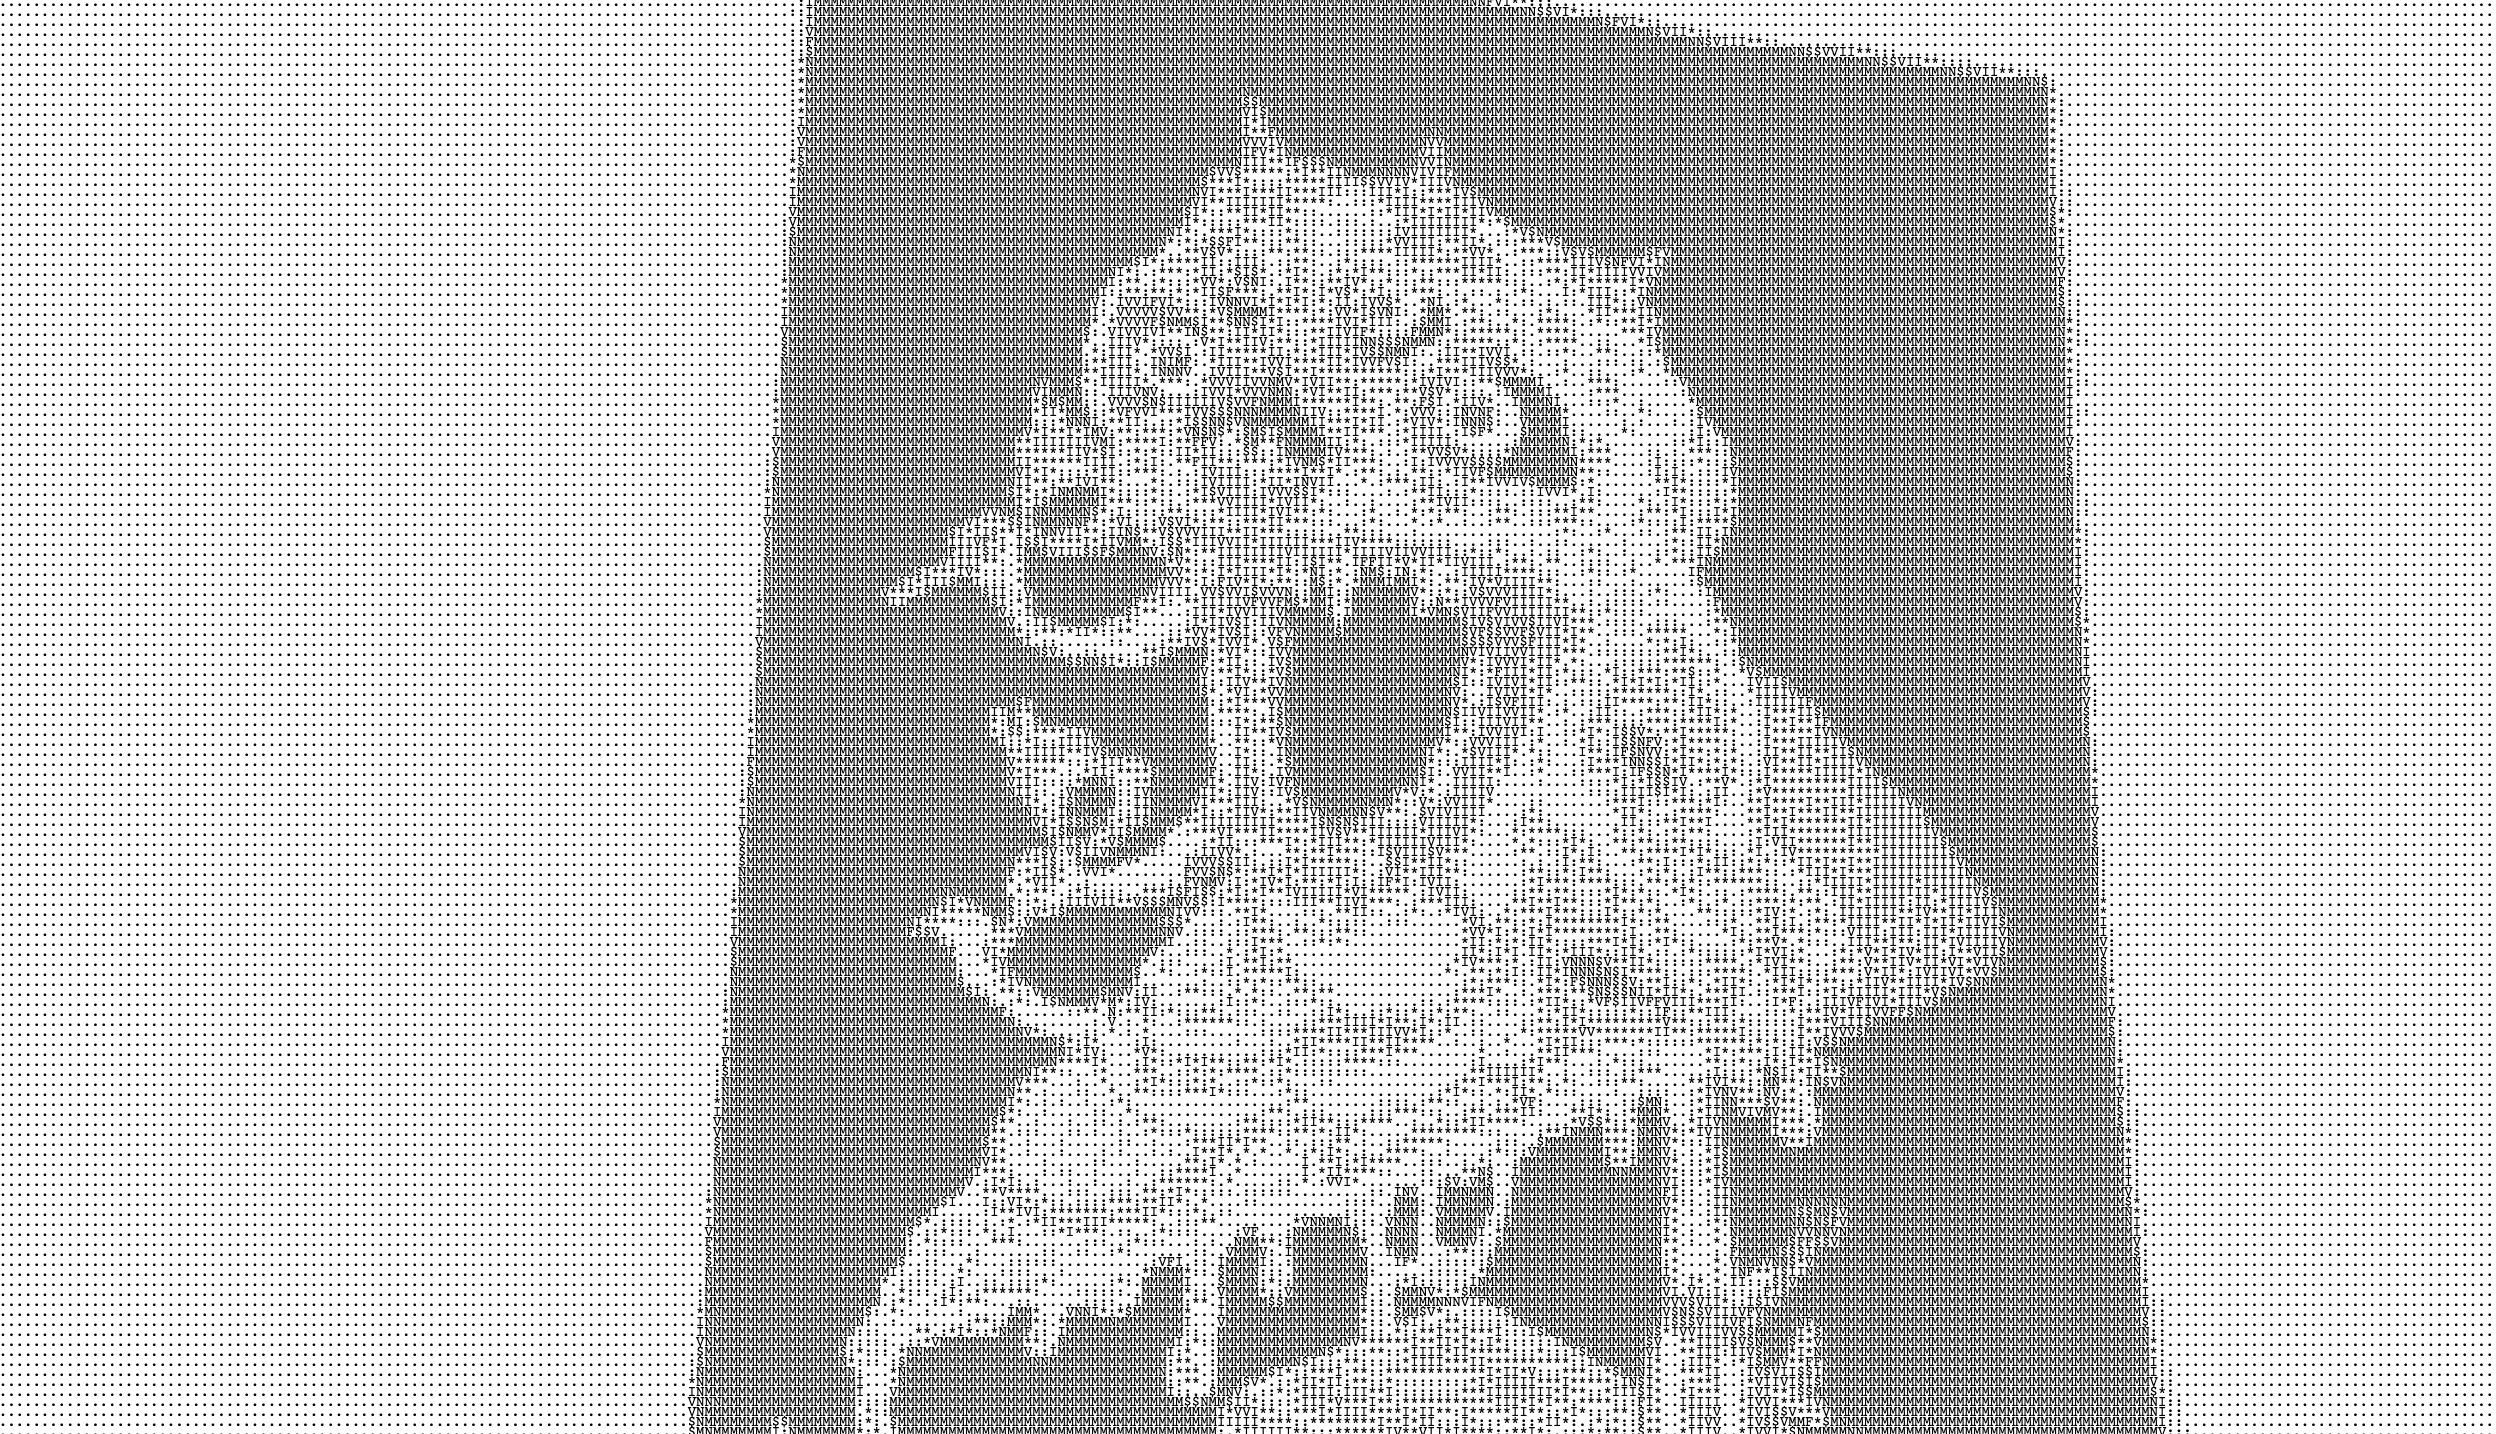 ASCII image filter example, featuring our completely normal house decor